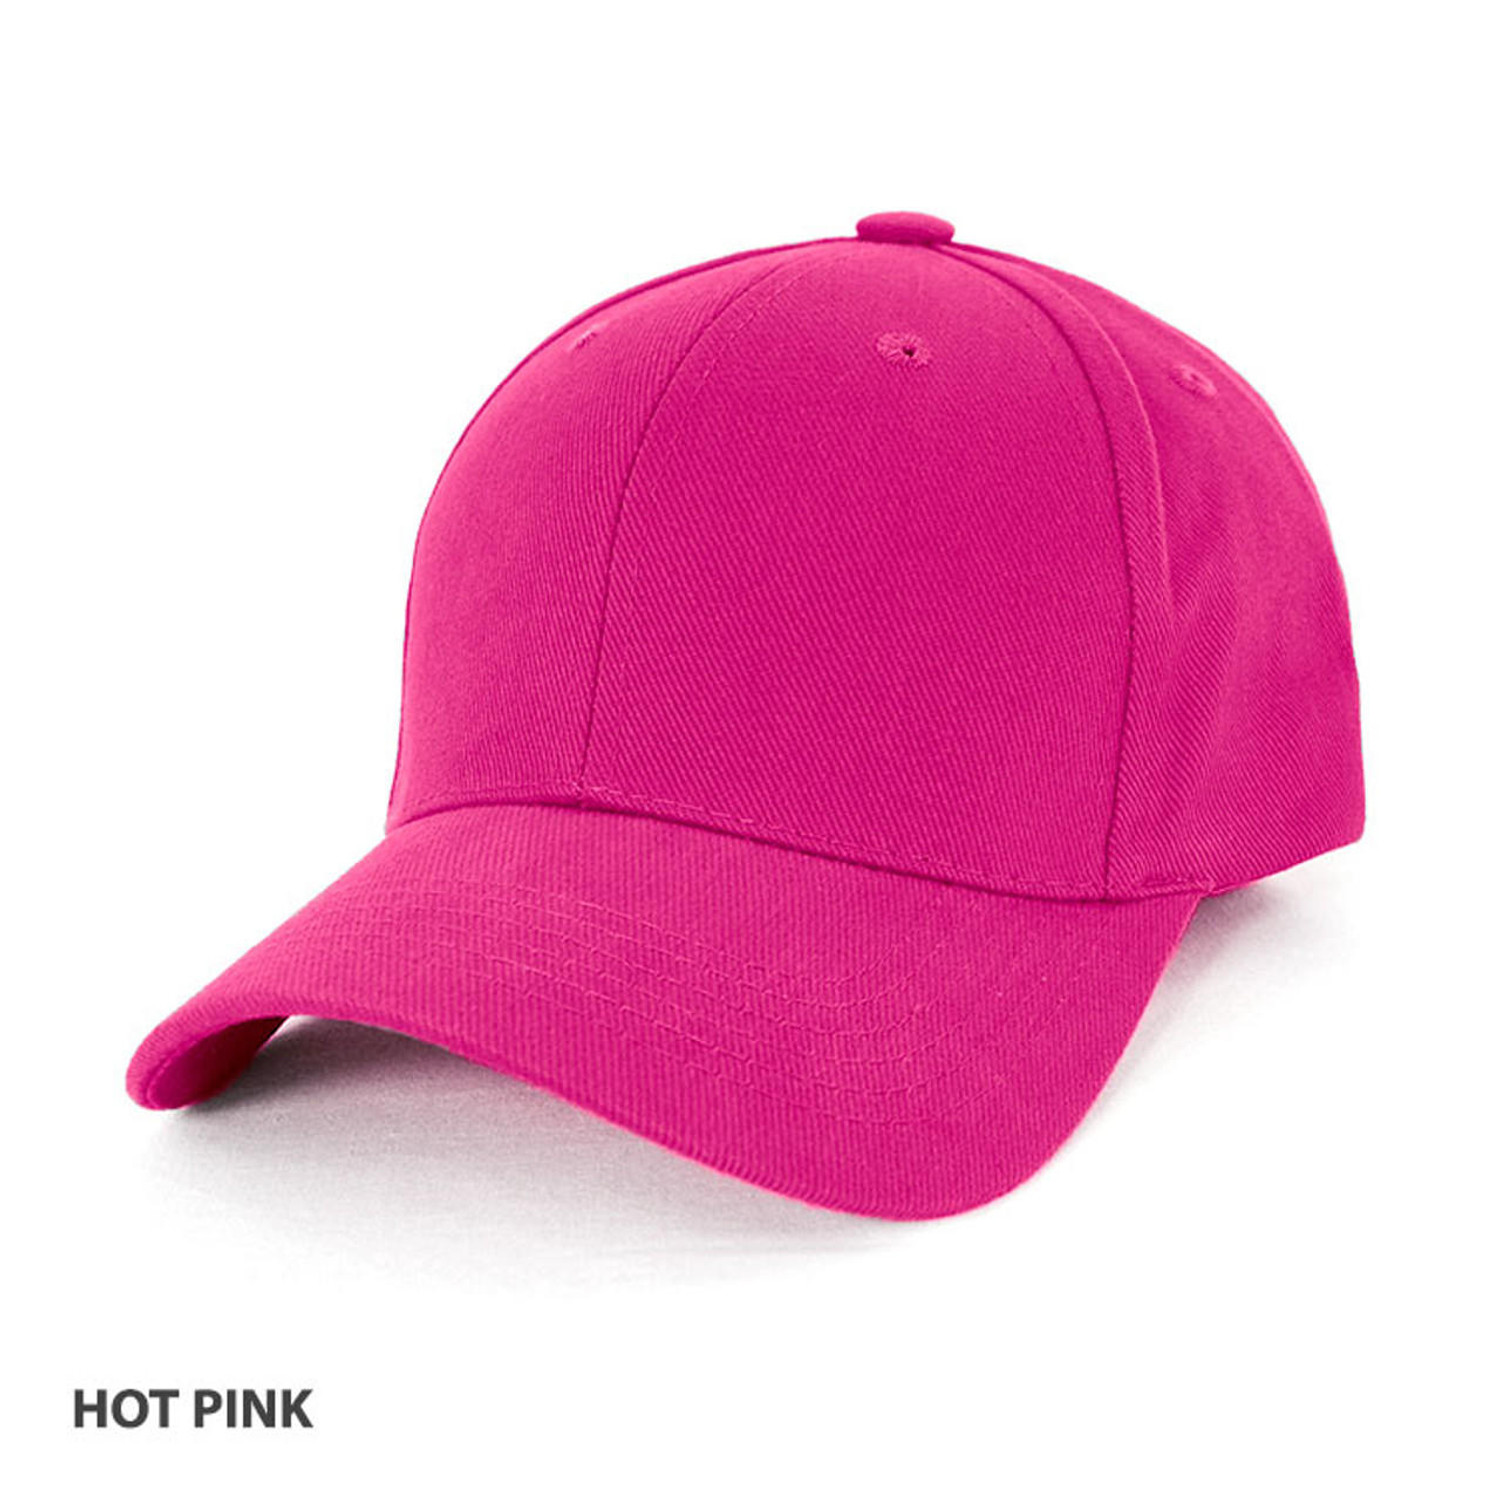  FREE EMBROIDERY - Heavy Brushed Cotton Cap in Hot Pink (Buy 20+) 